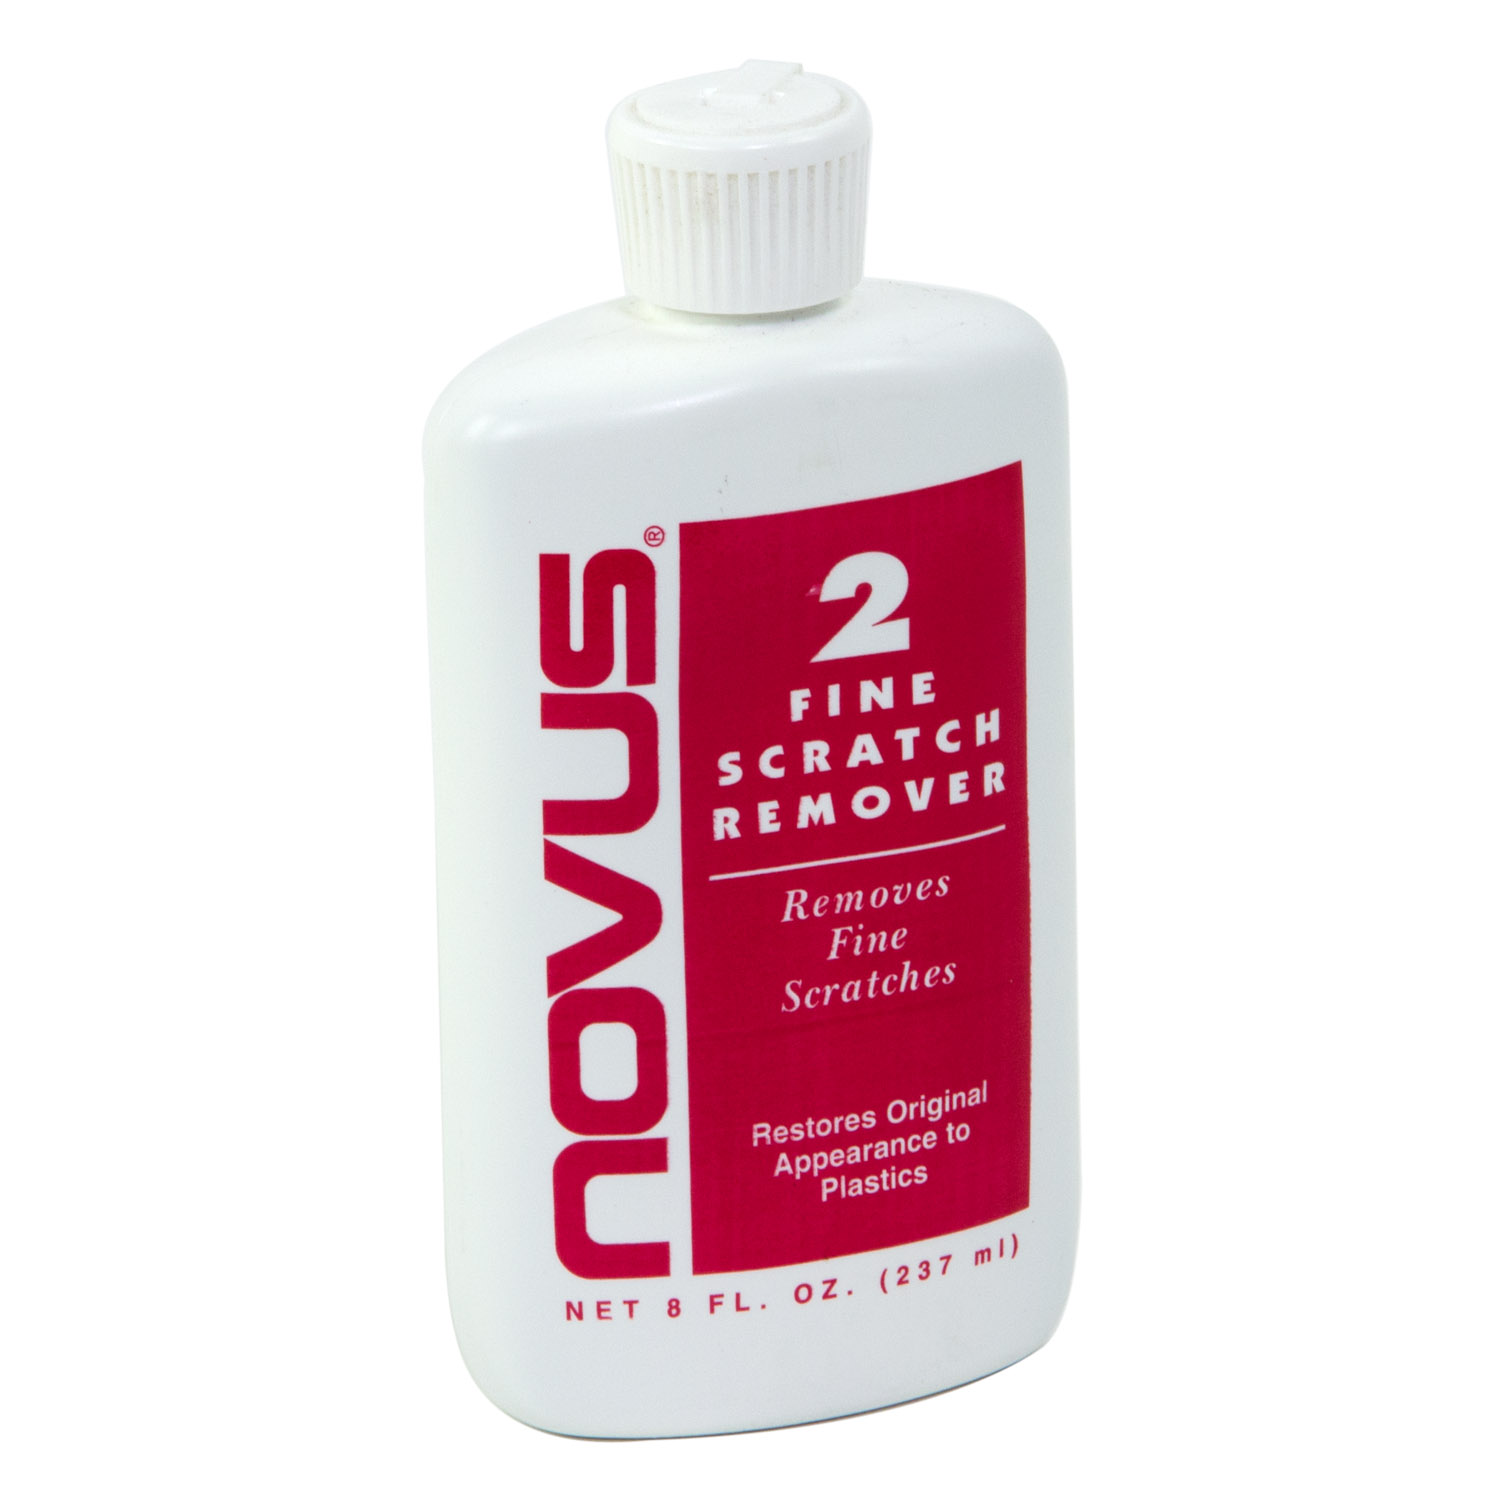 Novus 2 Fine Scratch Remover is great way to polish out all those